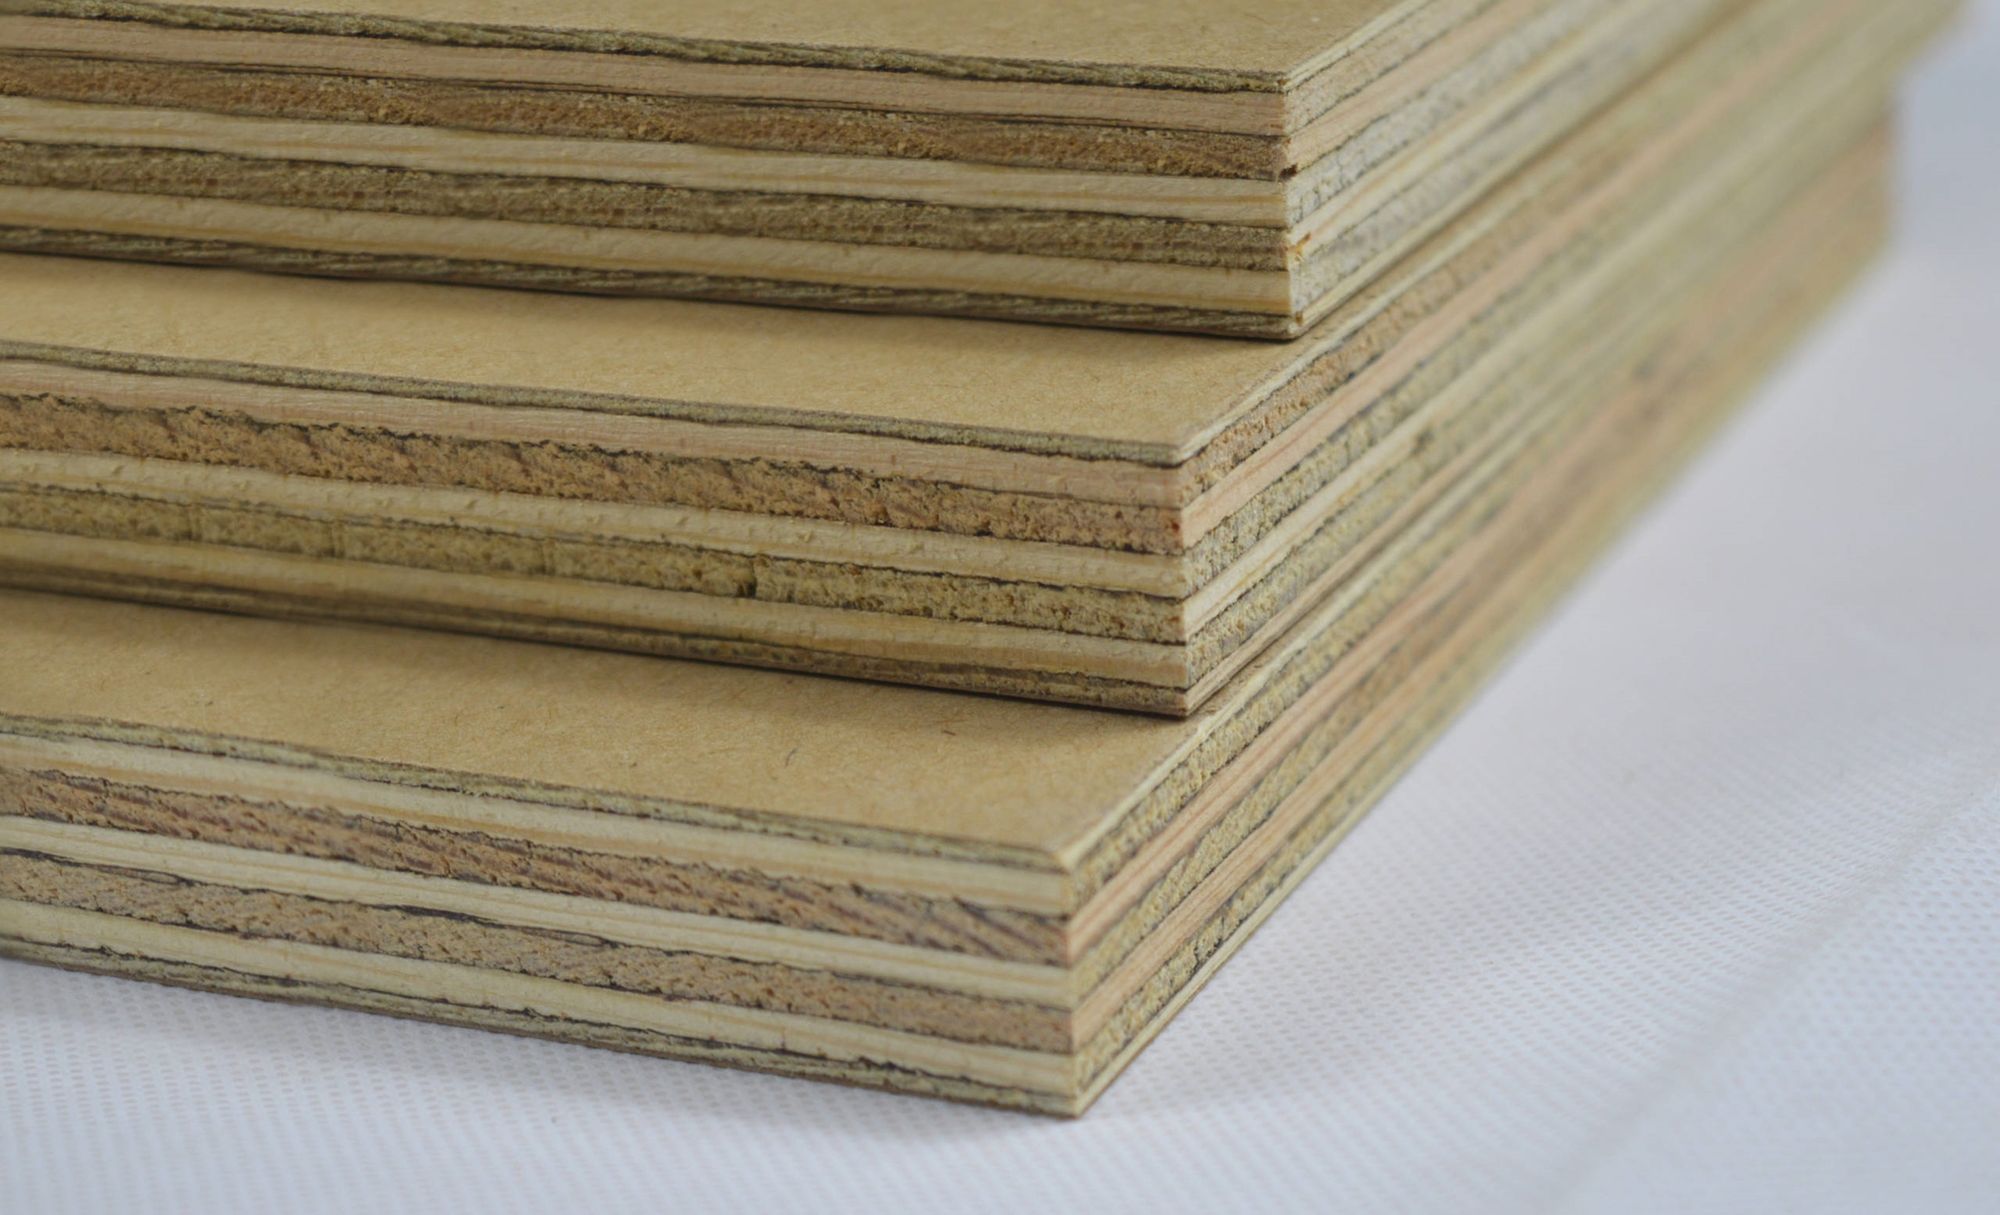 Corners of plywood boards showing layers in profile.